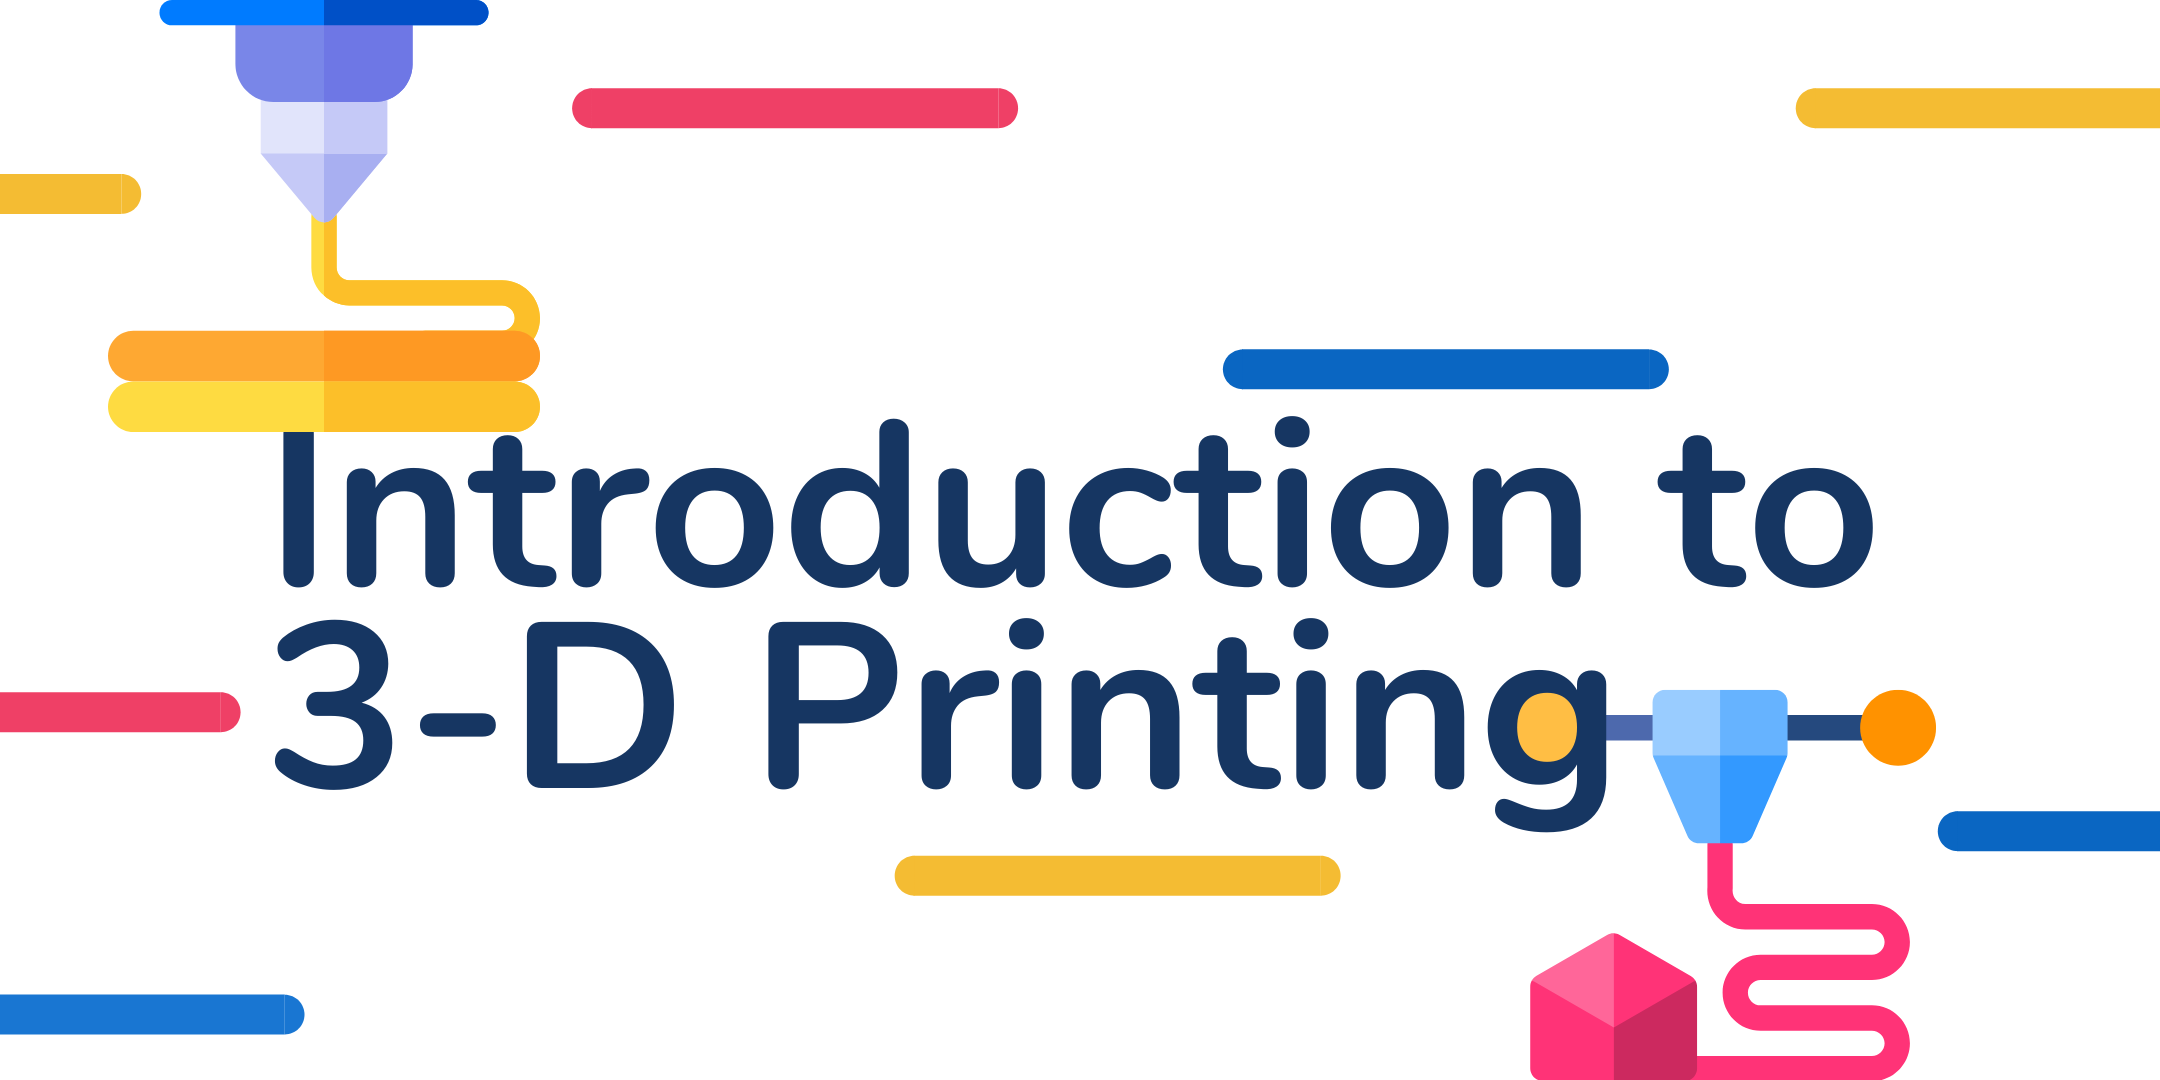 image of "Introduction to 3-D Printing"